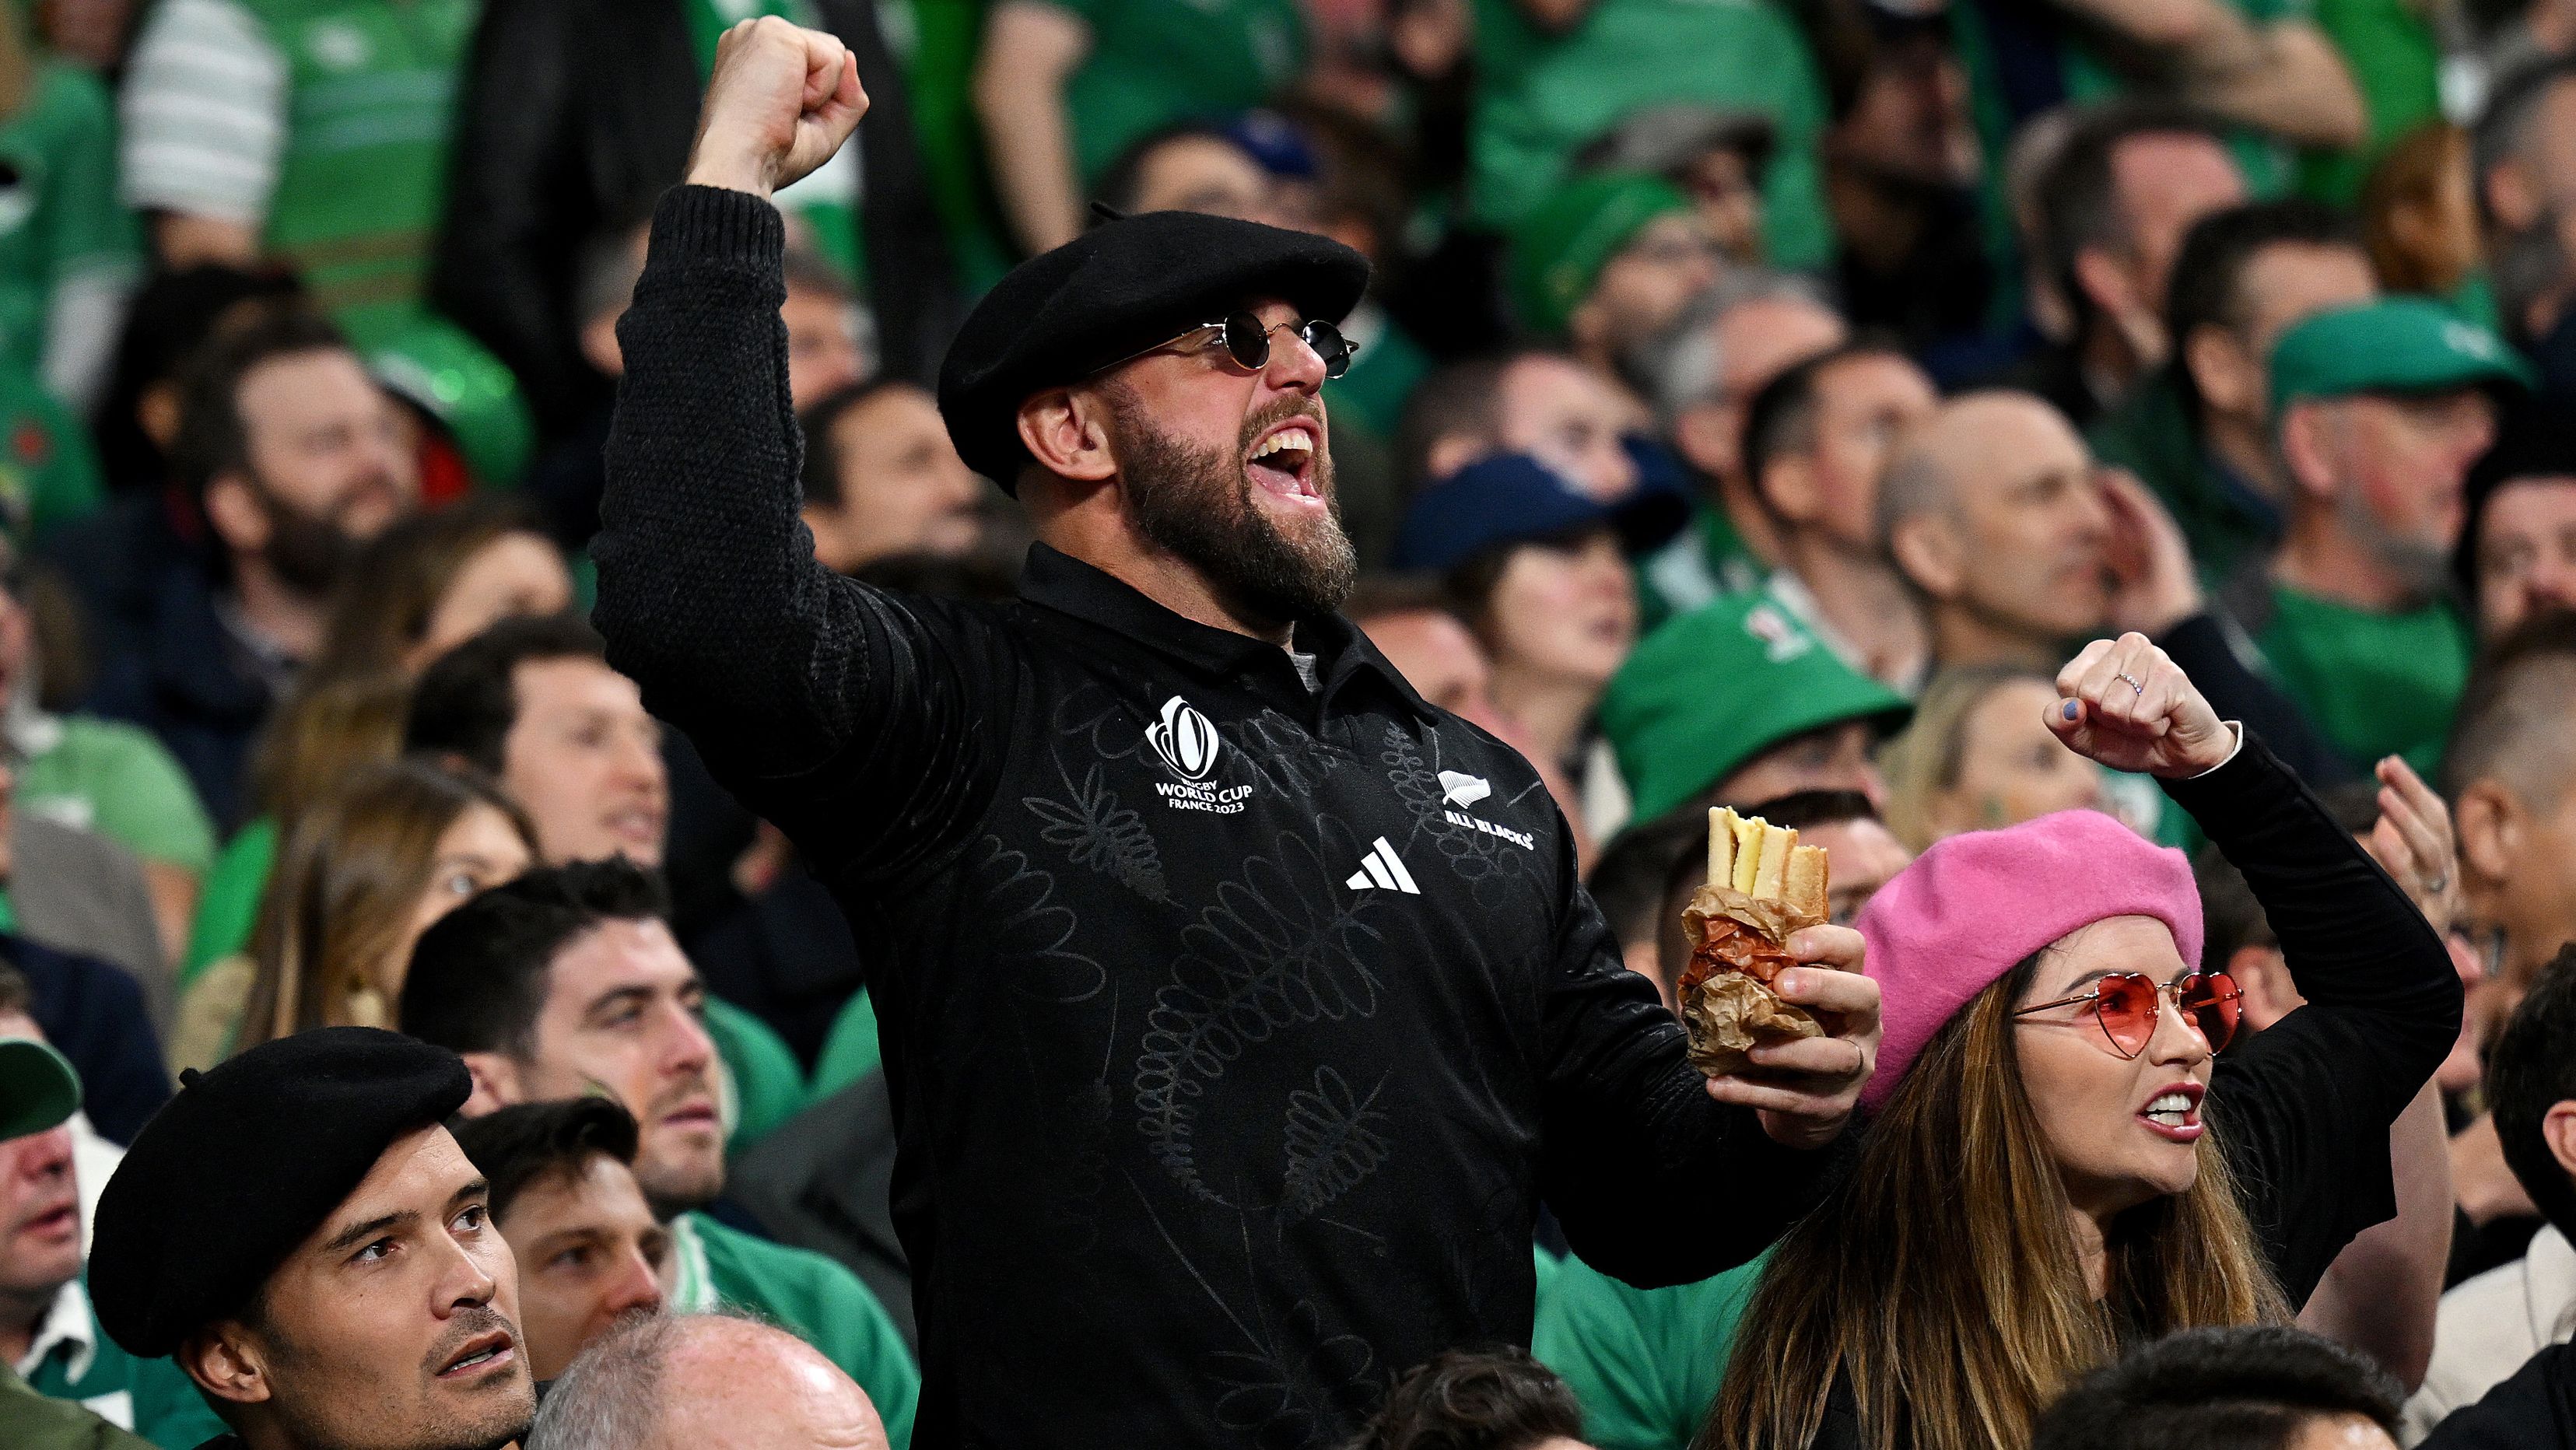 A fan of New Zealand enjoys the atmosphere during the Rugby World Cup.